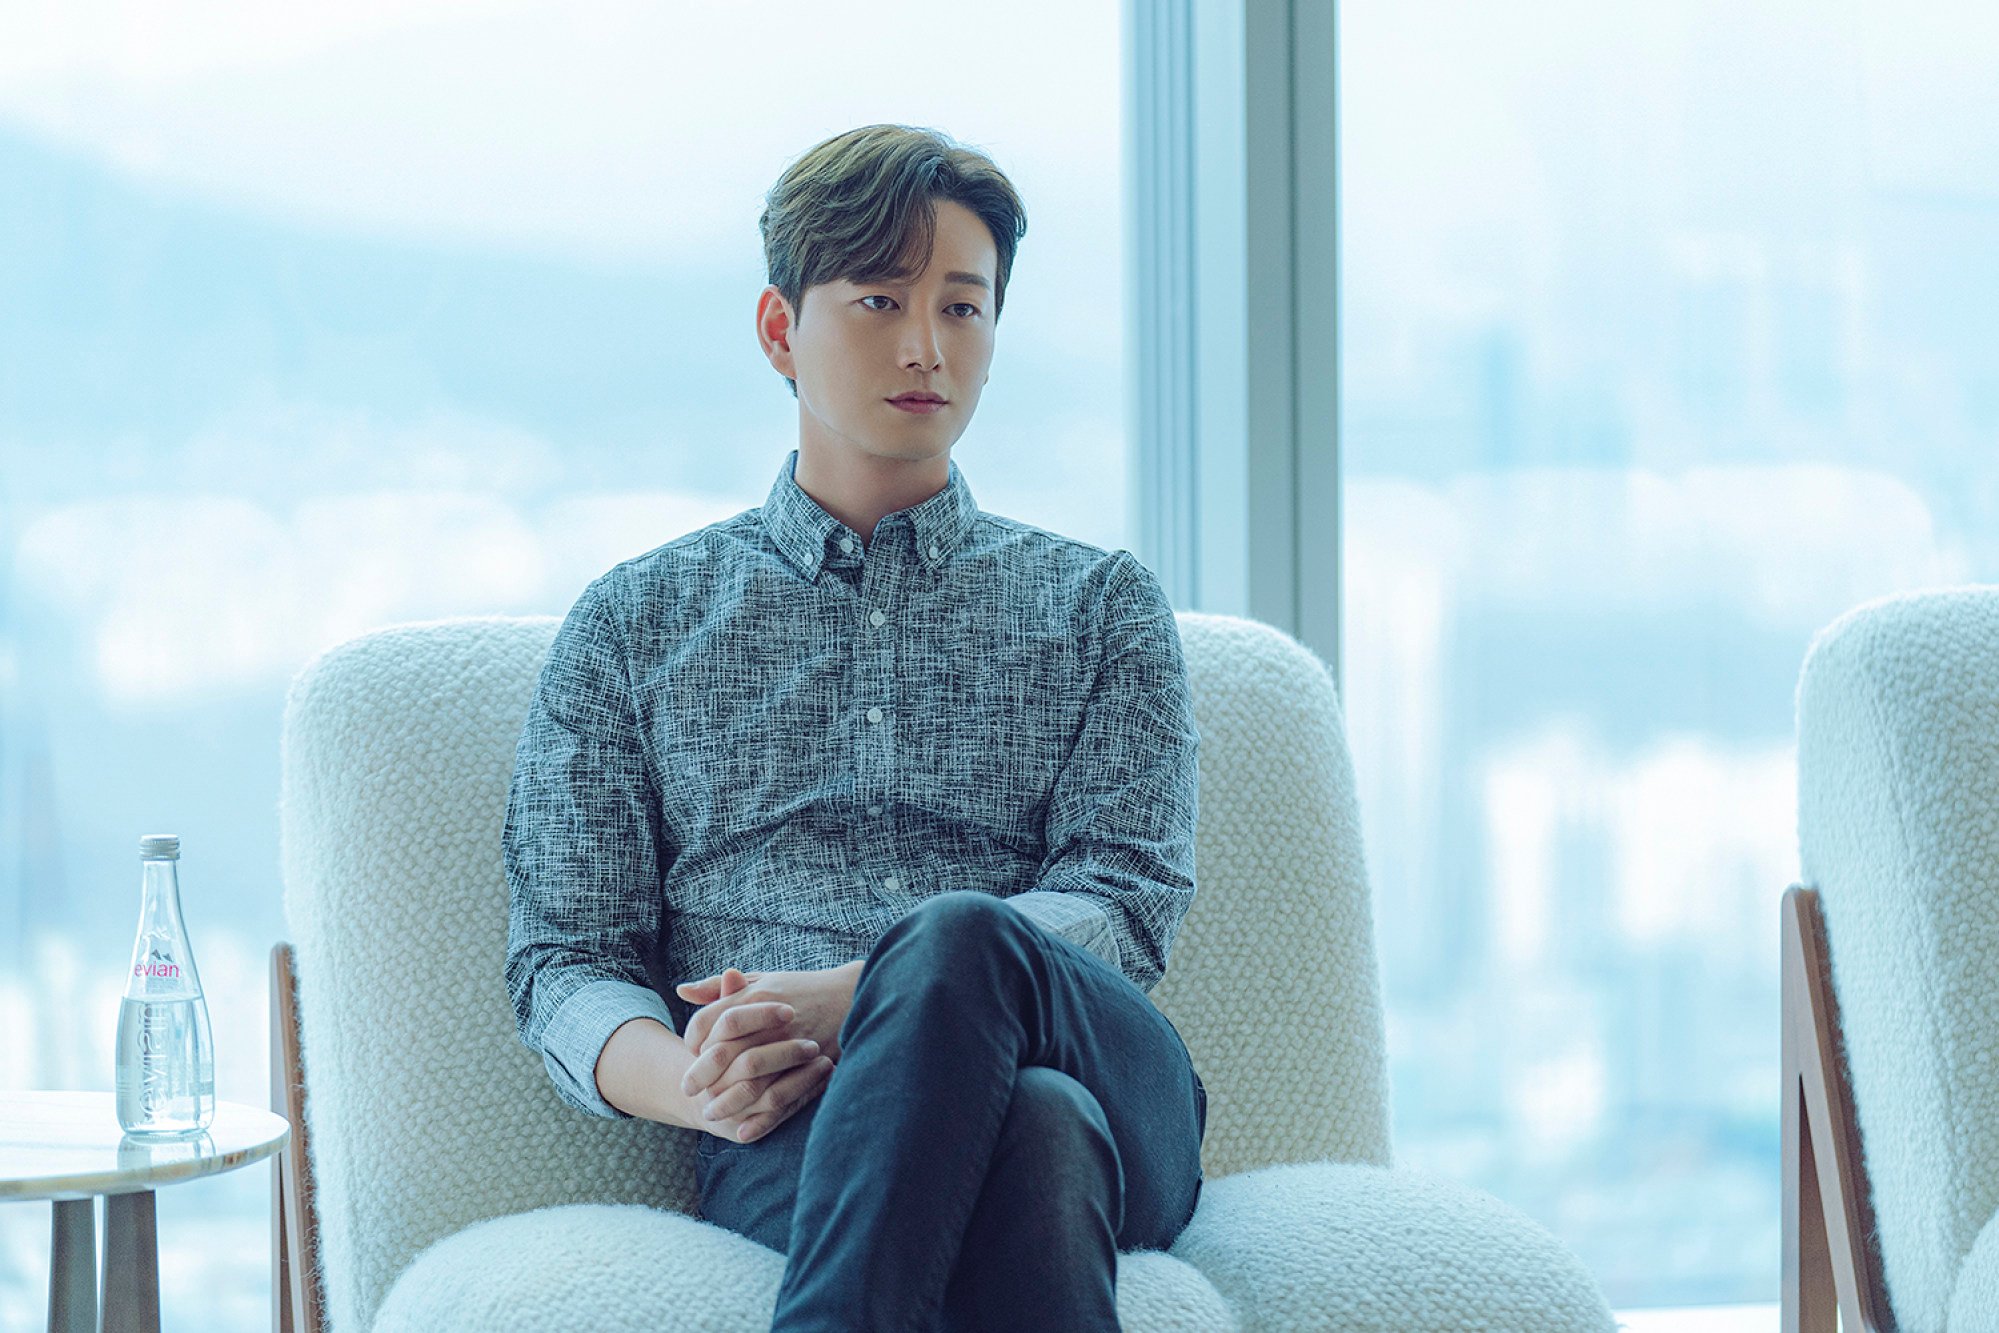 Remarriage & Desires: Matchmaking melodrama starring Kim Hee-seon and Lee  Hyun-wook is slick enough, but lacks fireworks, Entertainment News - AsiaOne